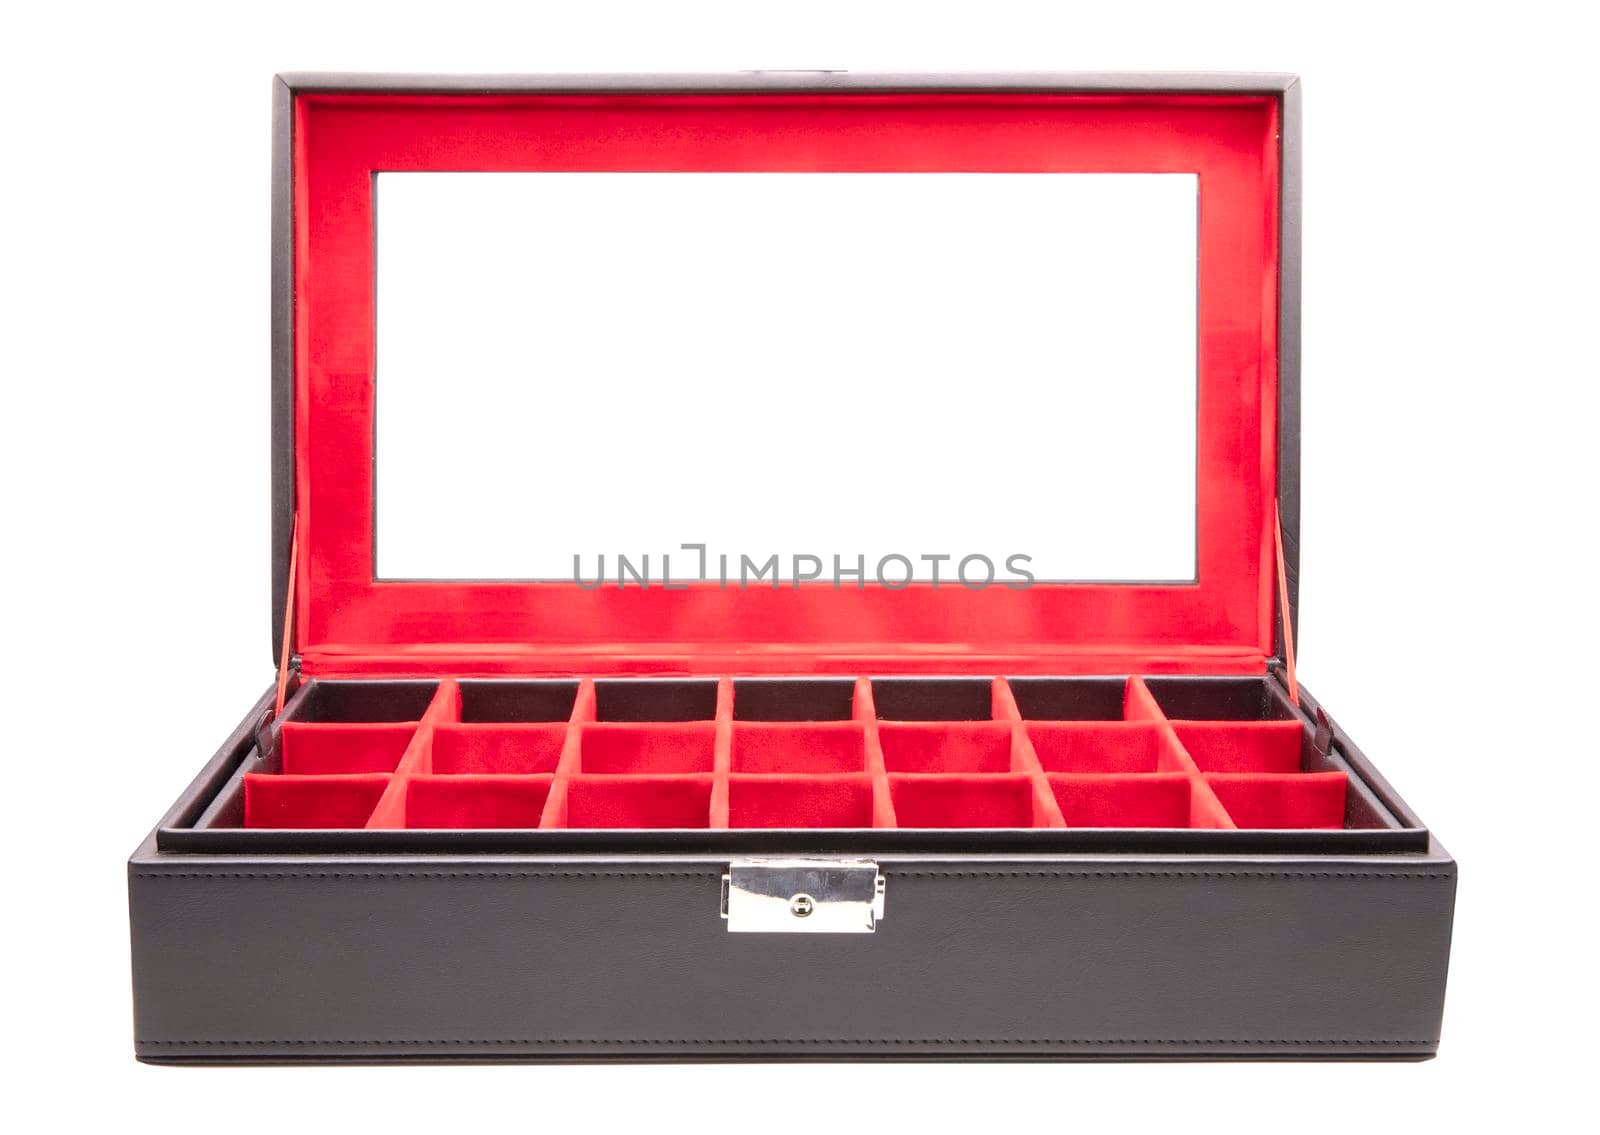 Opened leather box with red velvet interior by drpnncpp